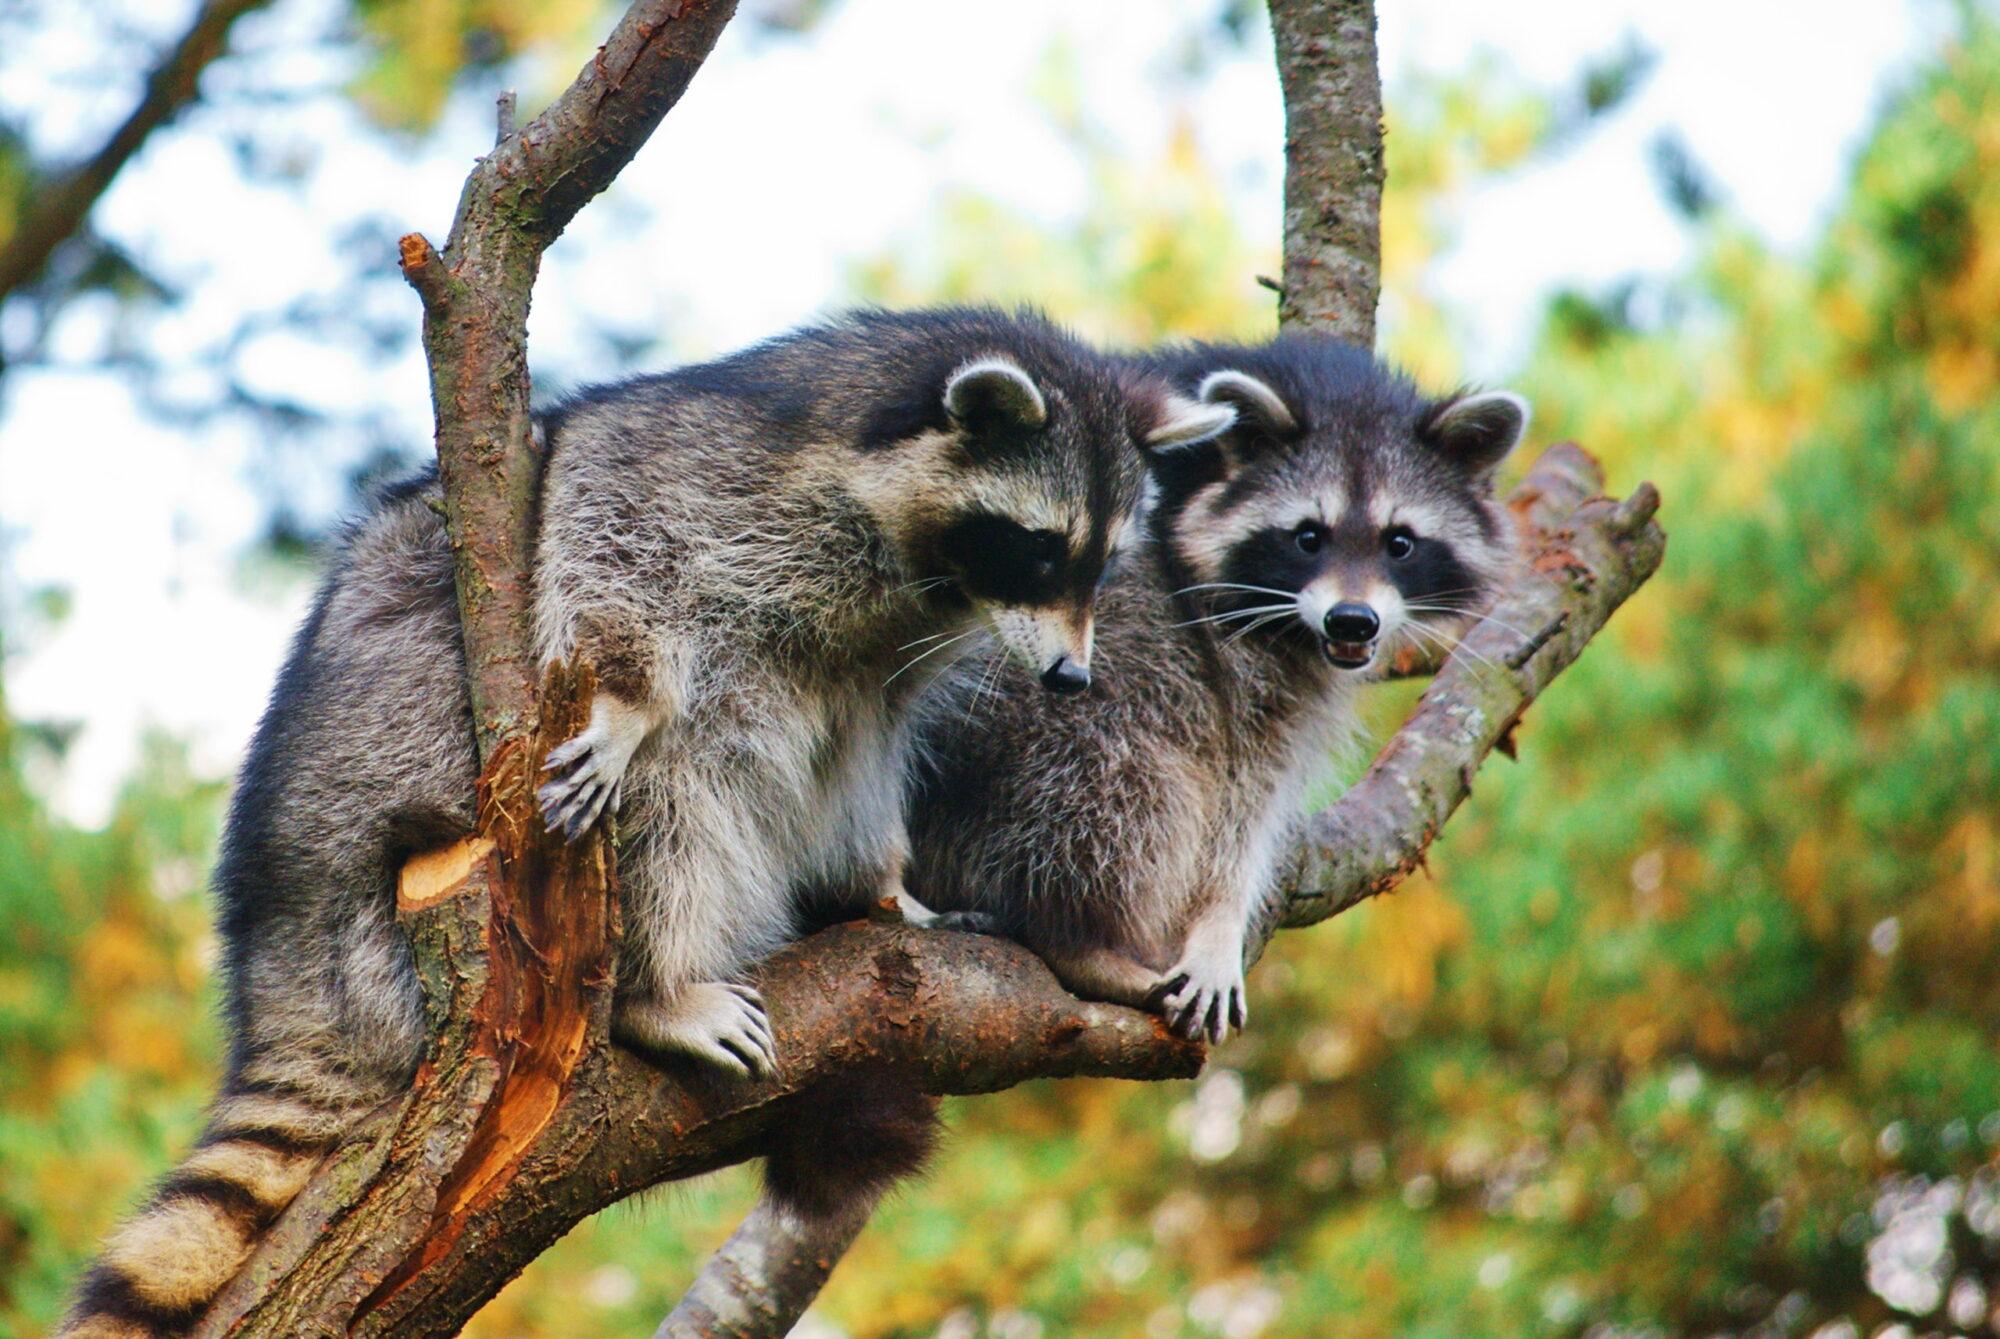 What You Should Know About Raccoons - Raccoon Removal Experts in Houston - Elite Wildlife Services